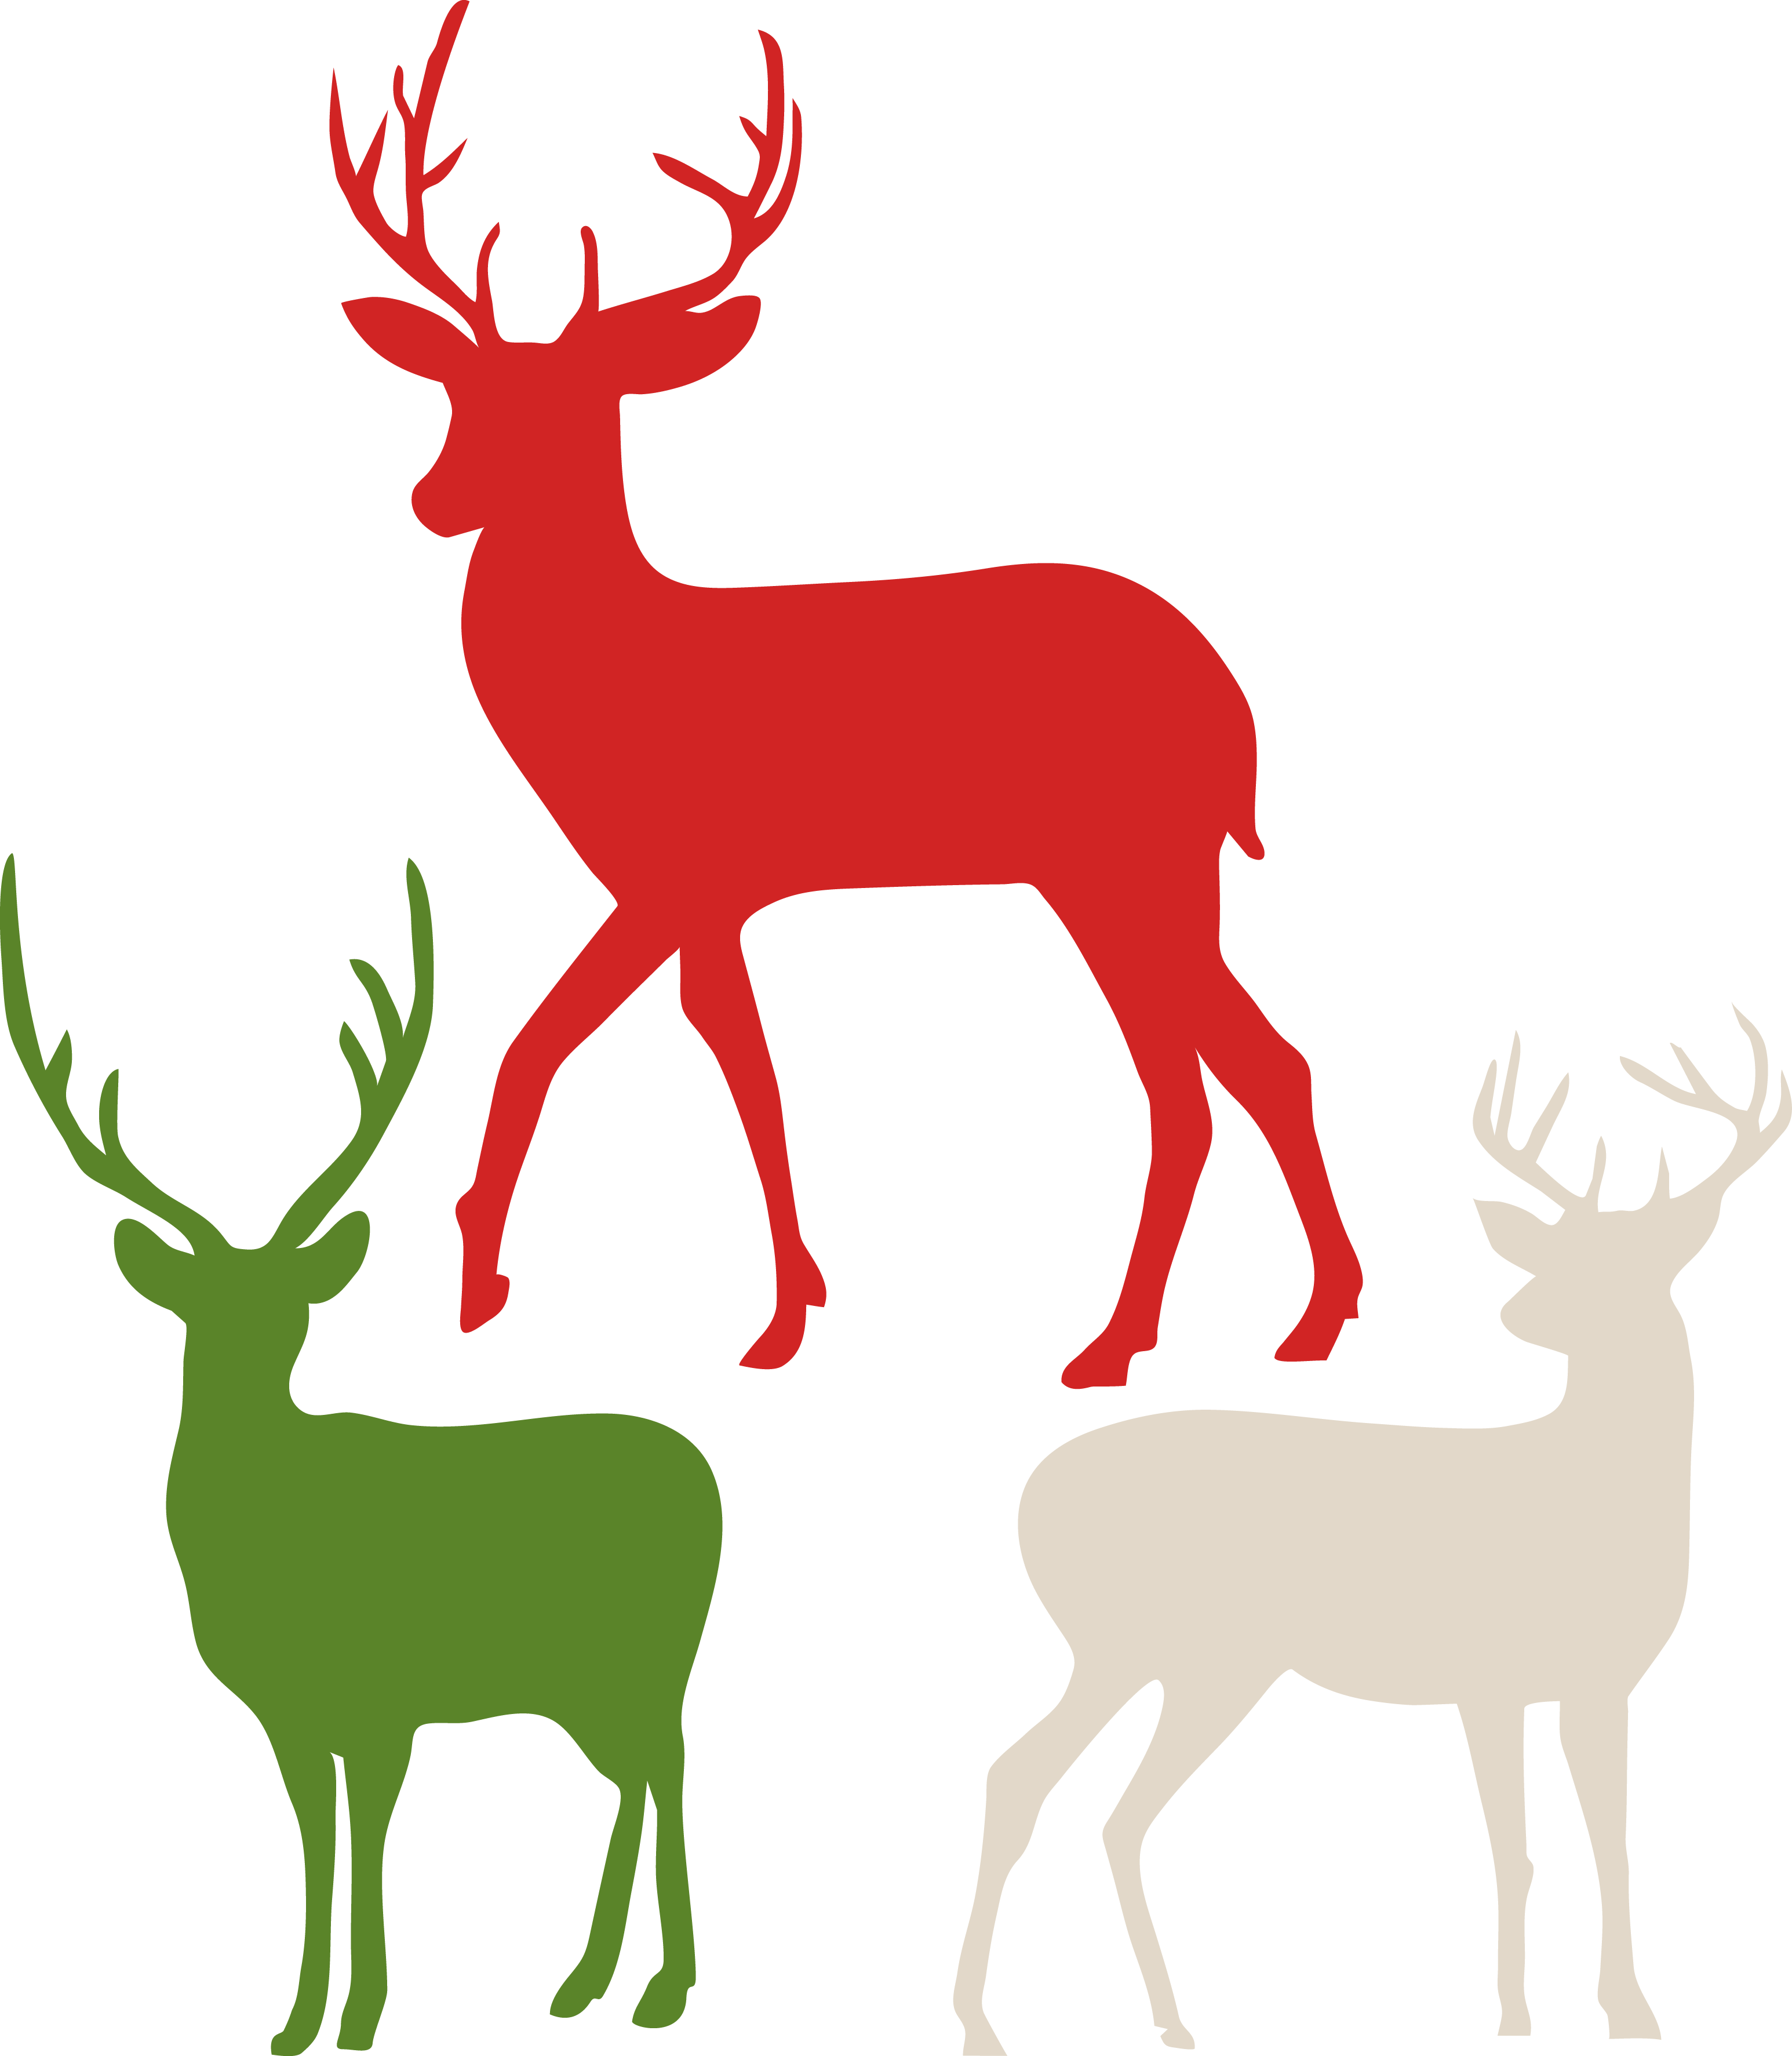 Download Download Reindeer Silhouette Motifs Cricut Ideas Silhouettes Reindeer Svg Free Png Image With No Background Pngkey Com SVG, PNG, EPS, DXF File